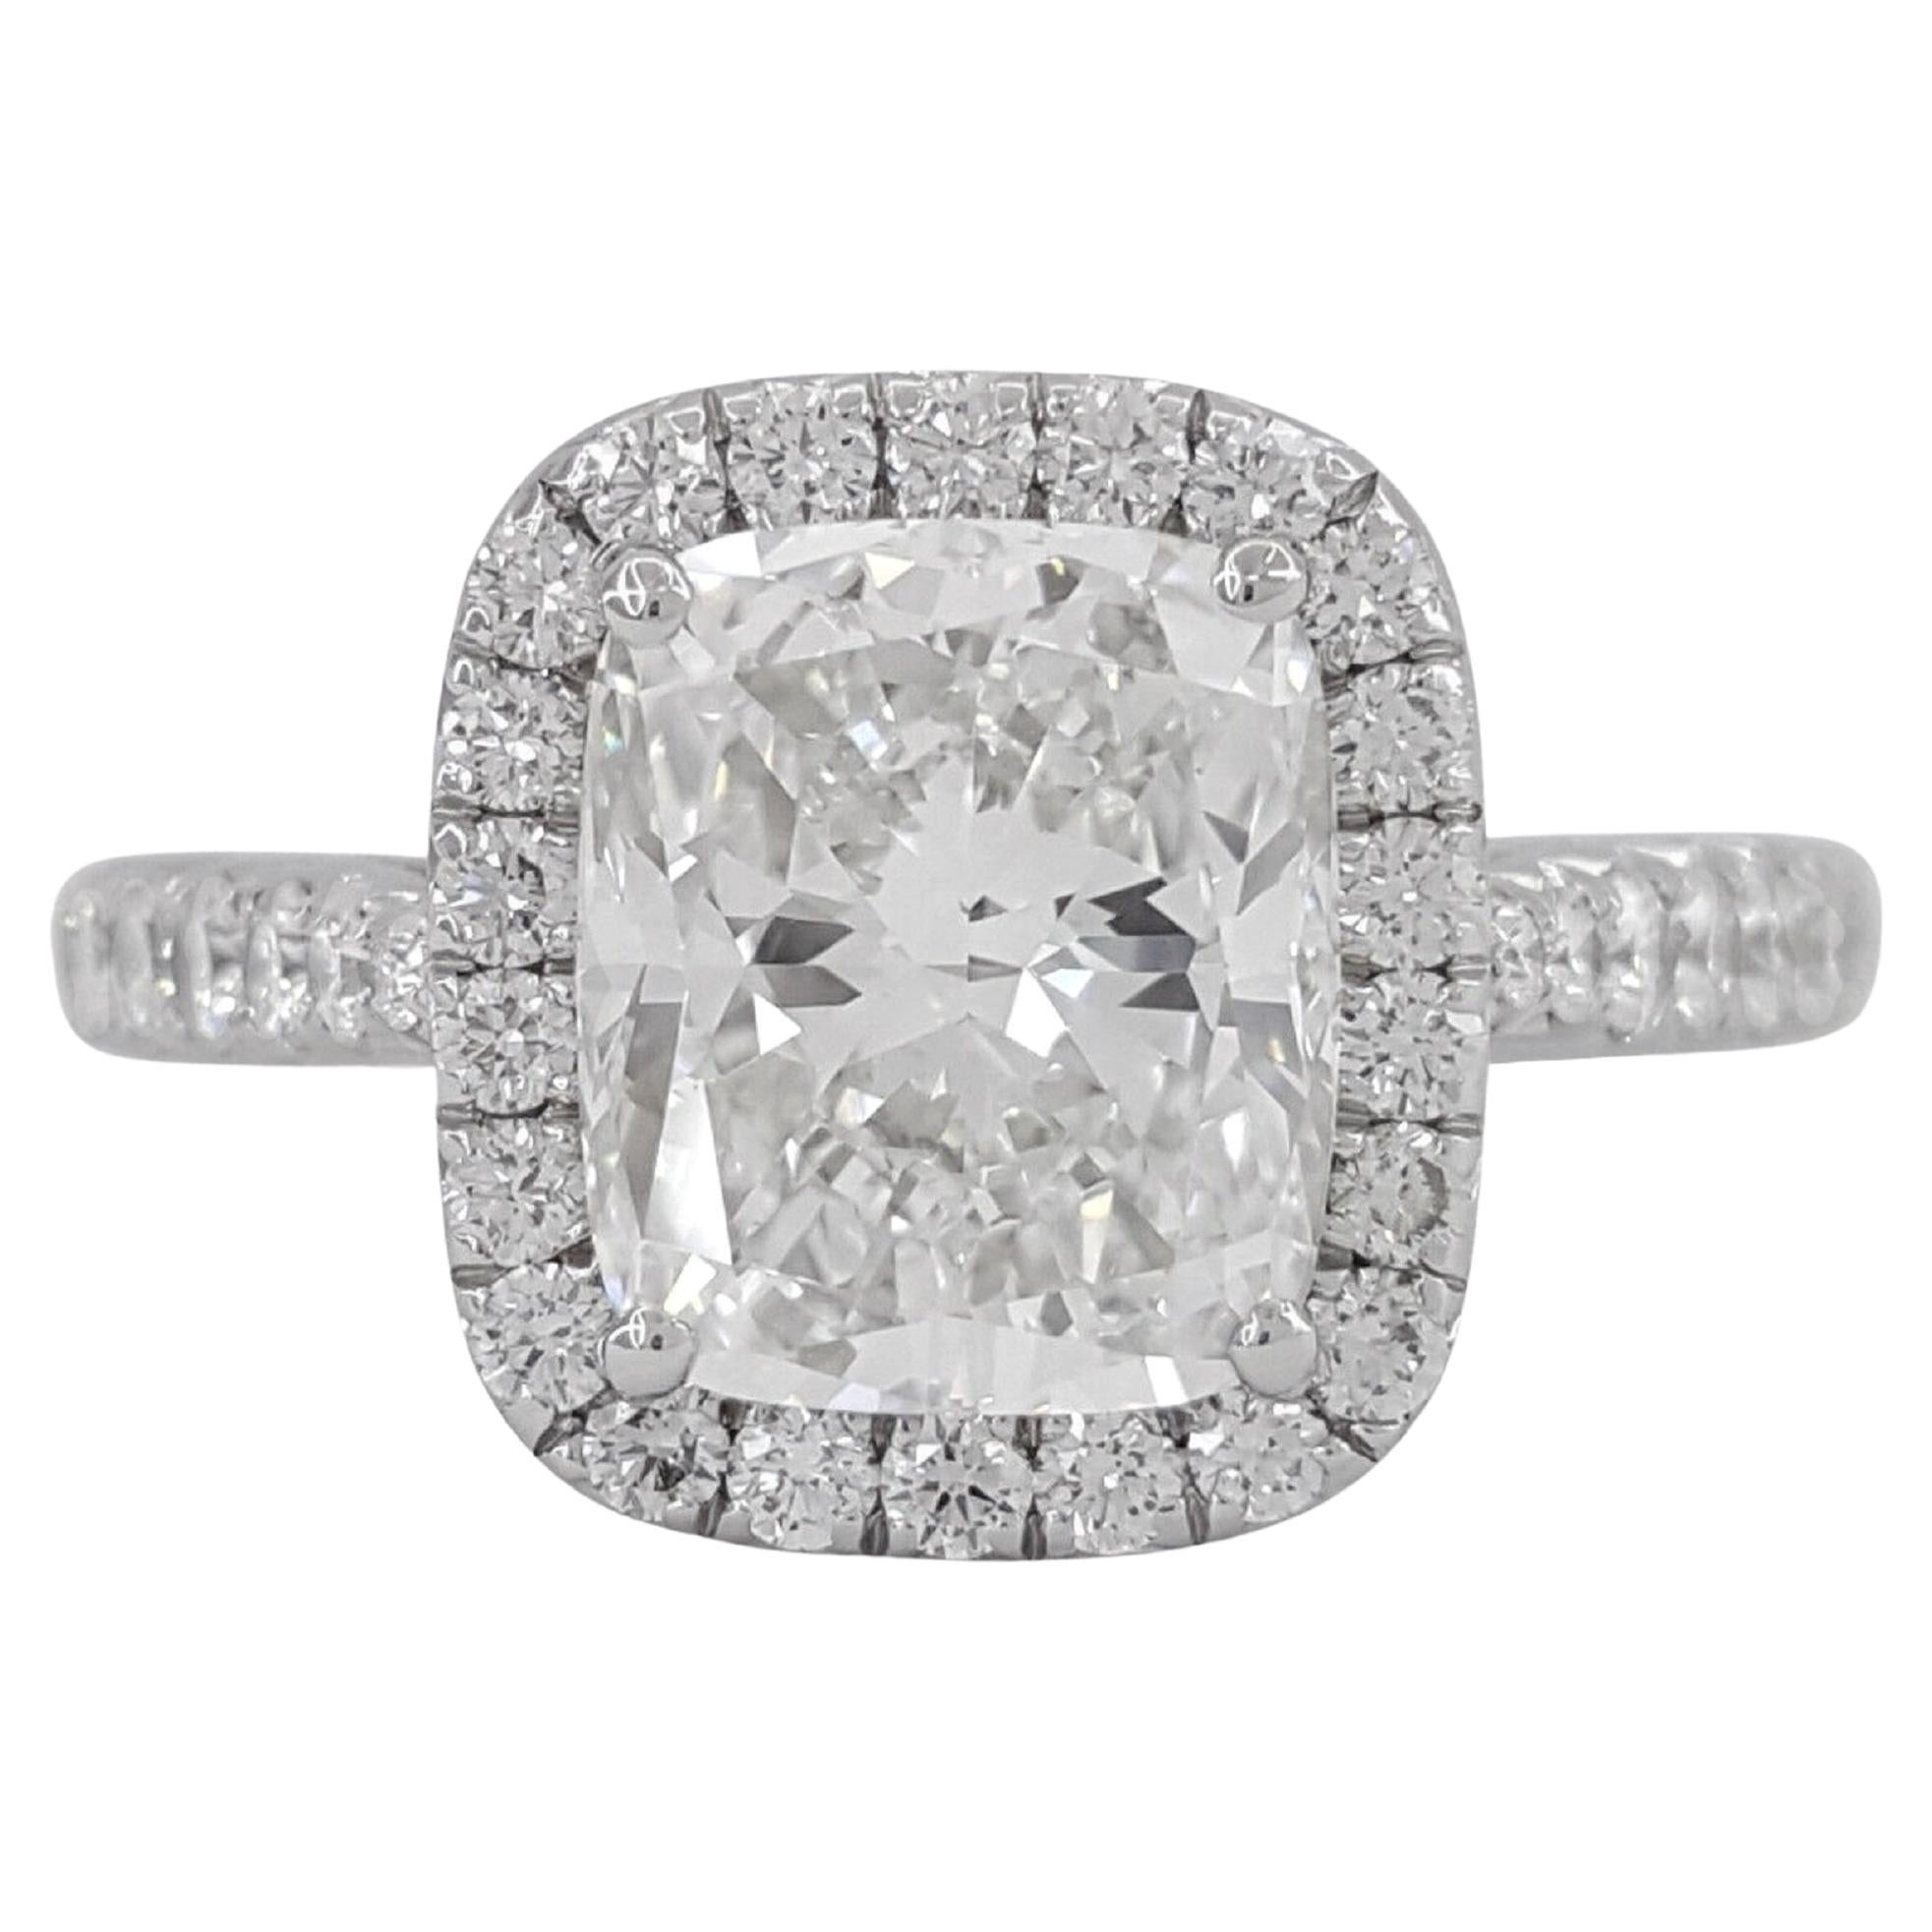 Cartier DESTINÉE Solitaire Platinum Cushion Cut Diamond Halo Engagement Ring.

The ring weighs 5.5 grams, size 5.25 (French 50), the center stone is a Natural Elongated Cushion Brilliant Cut diamond weighing 2.01 ct, F in color, VVS2 in clarity,